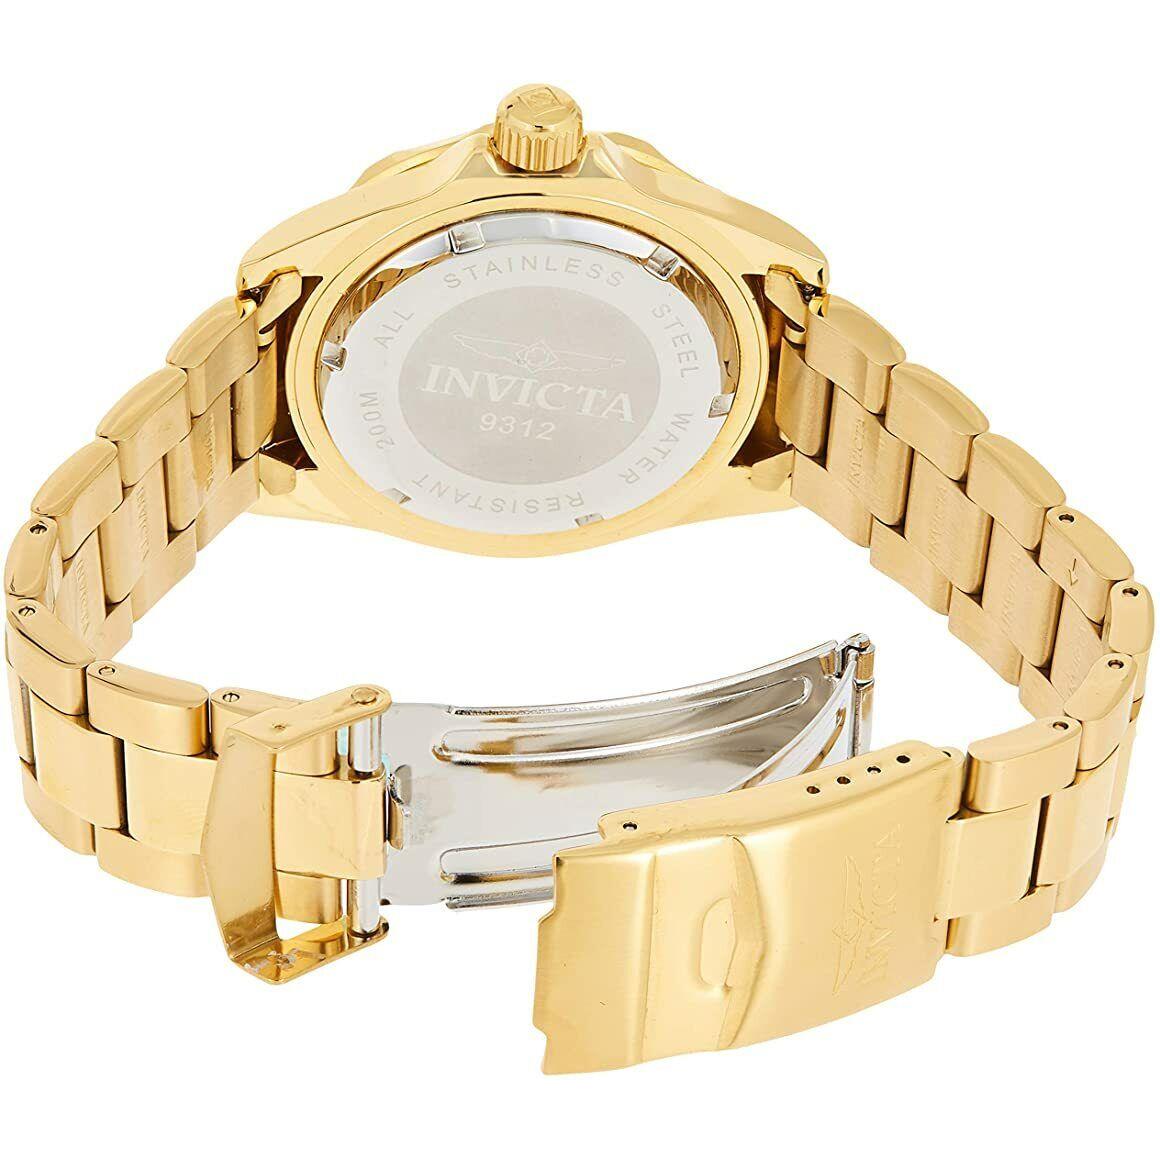 Invicta Pro Diver Blue Dial Gold Plated Stainless Steel Unisex Watch 9312 - Dial: Blue, Band: Gold